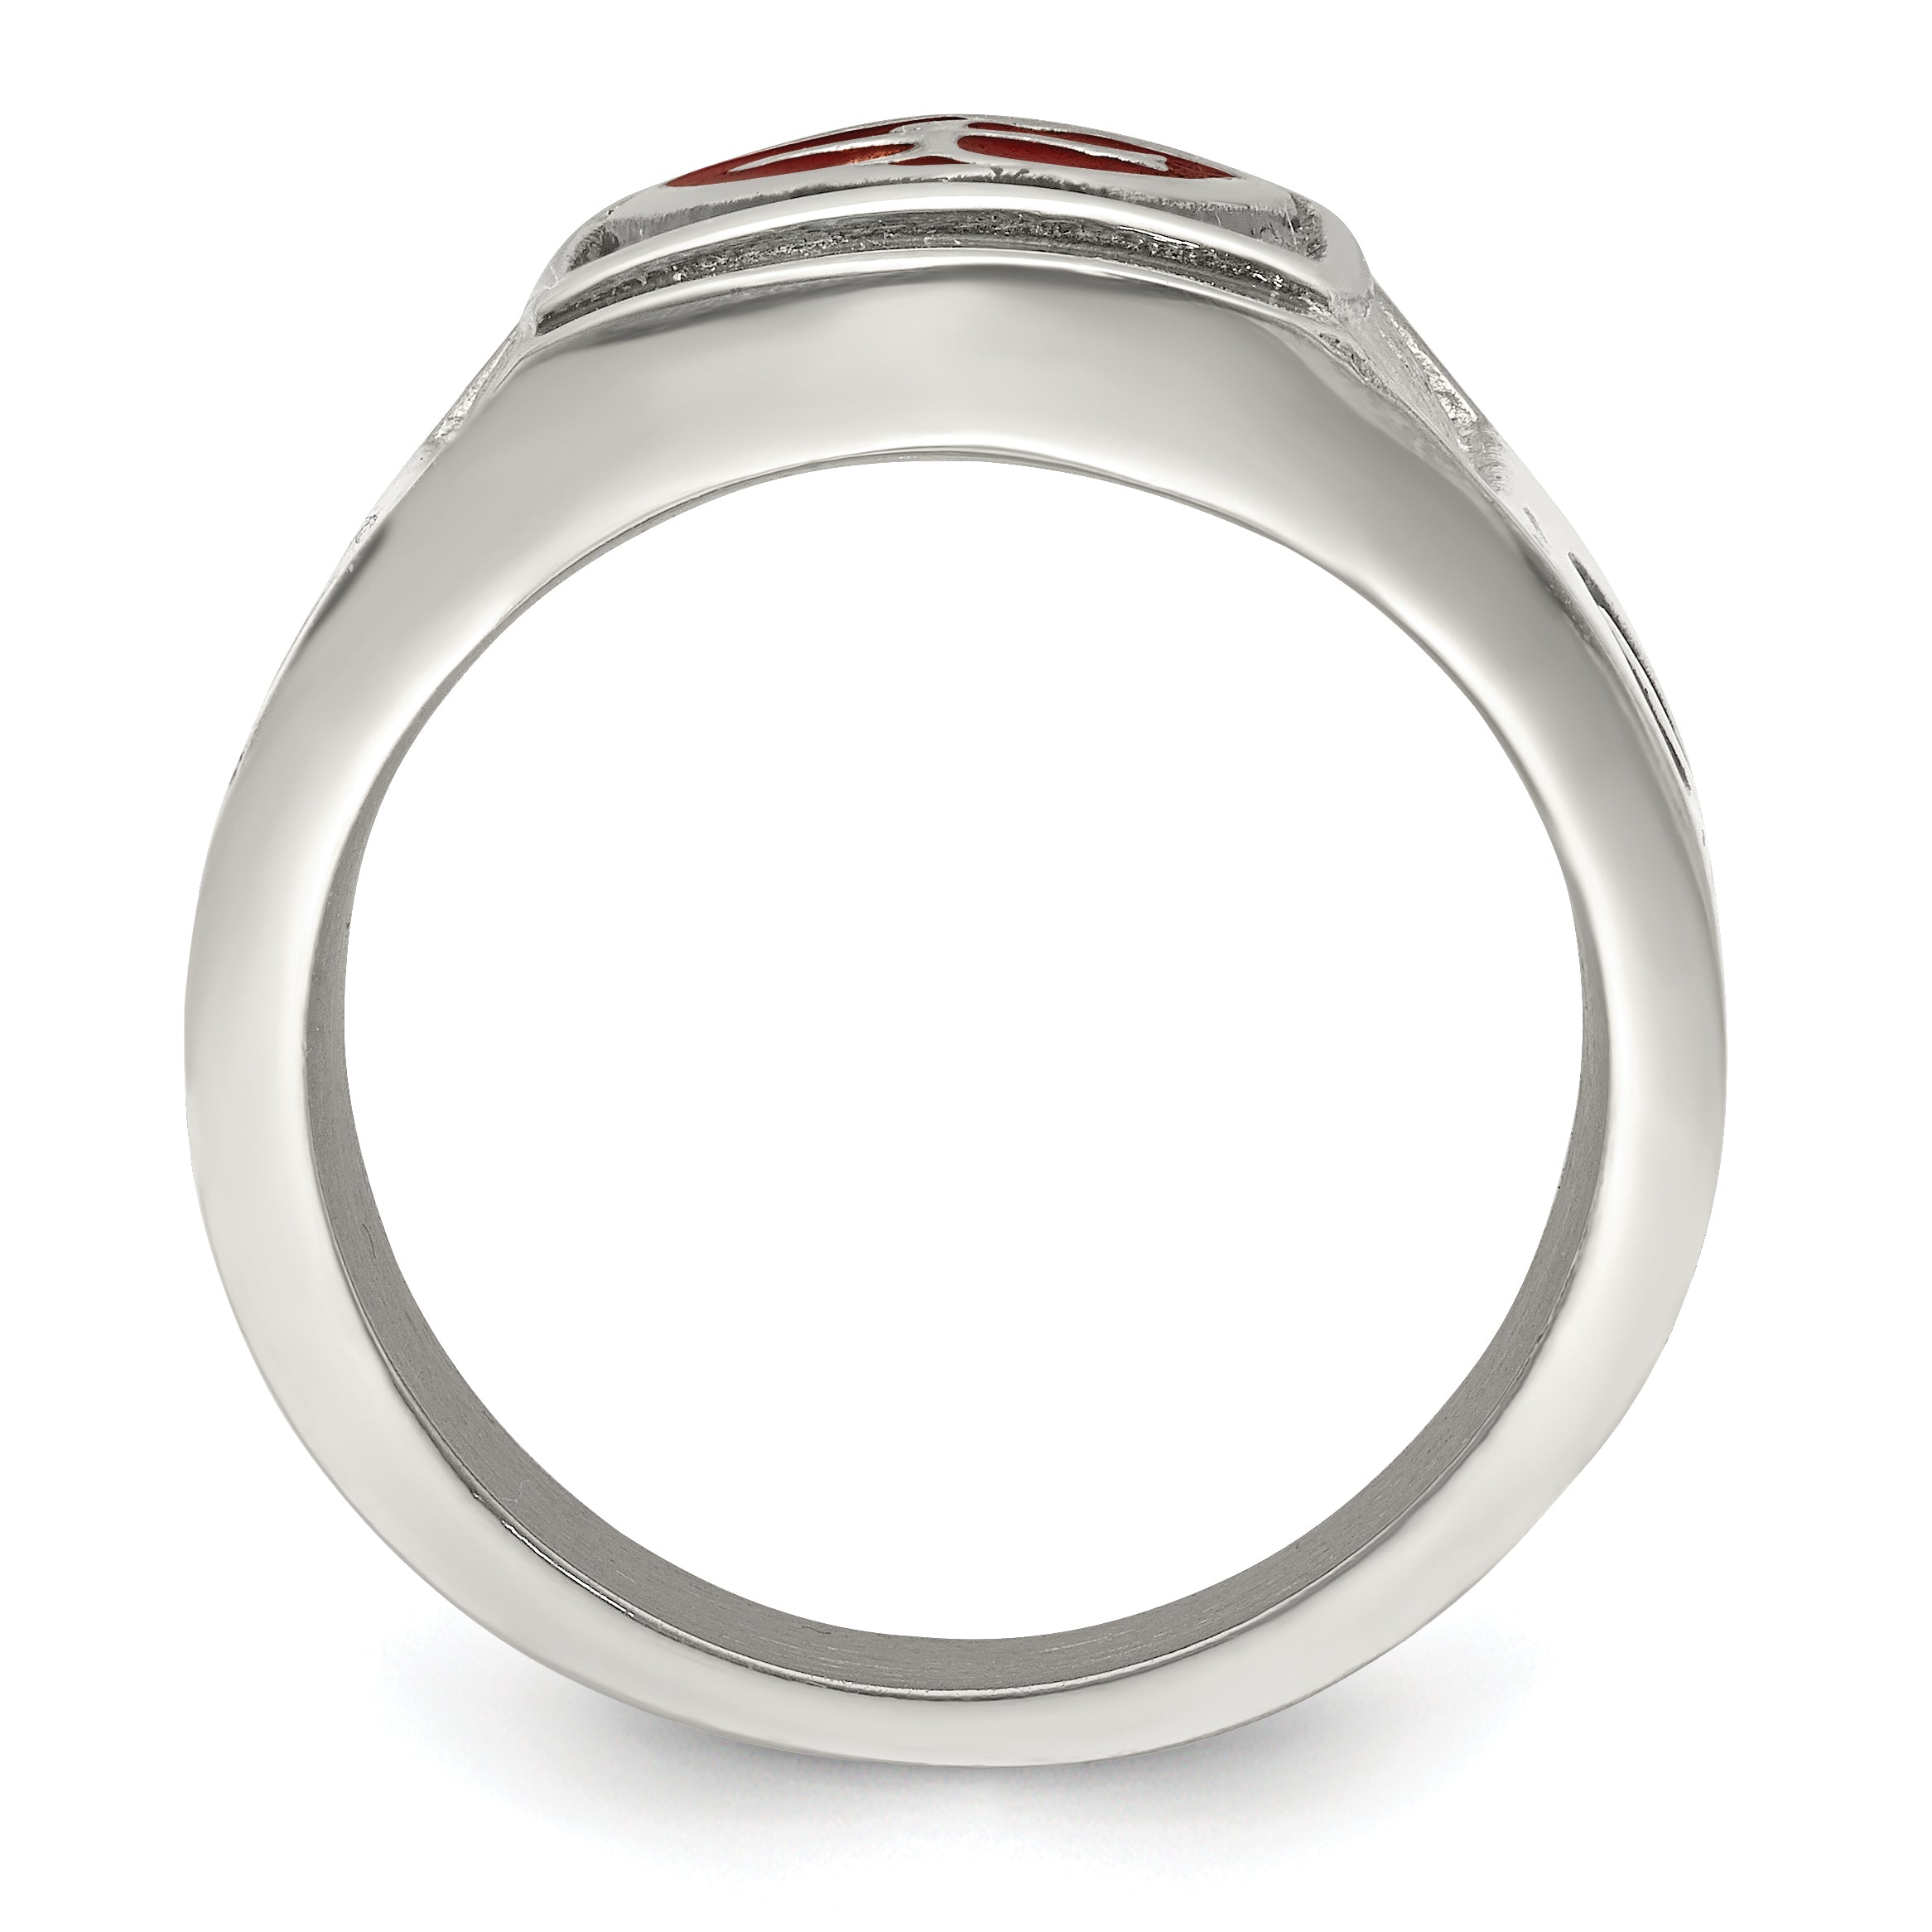 Stainless Steel Antiqued and Polished with Red Enamel Cross and Shield Ring